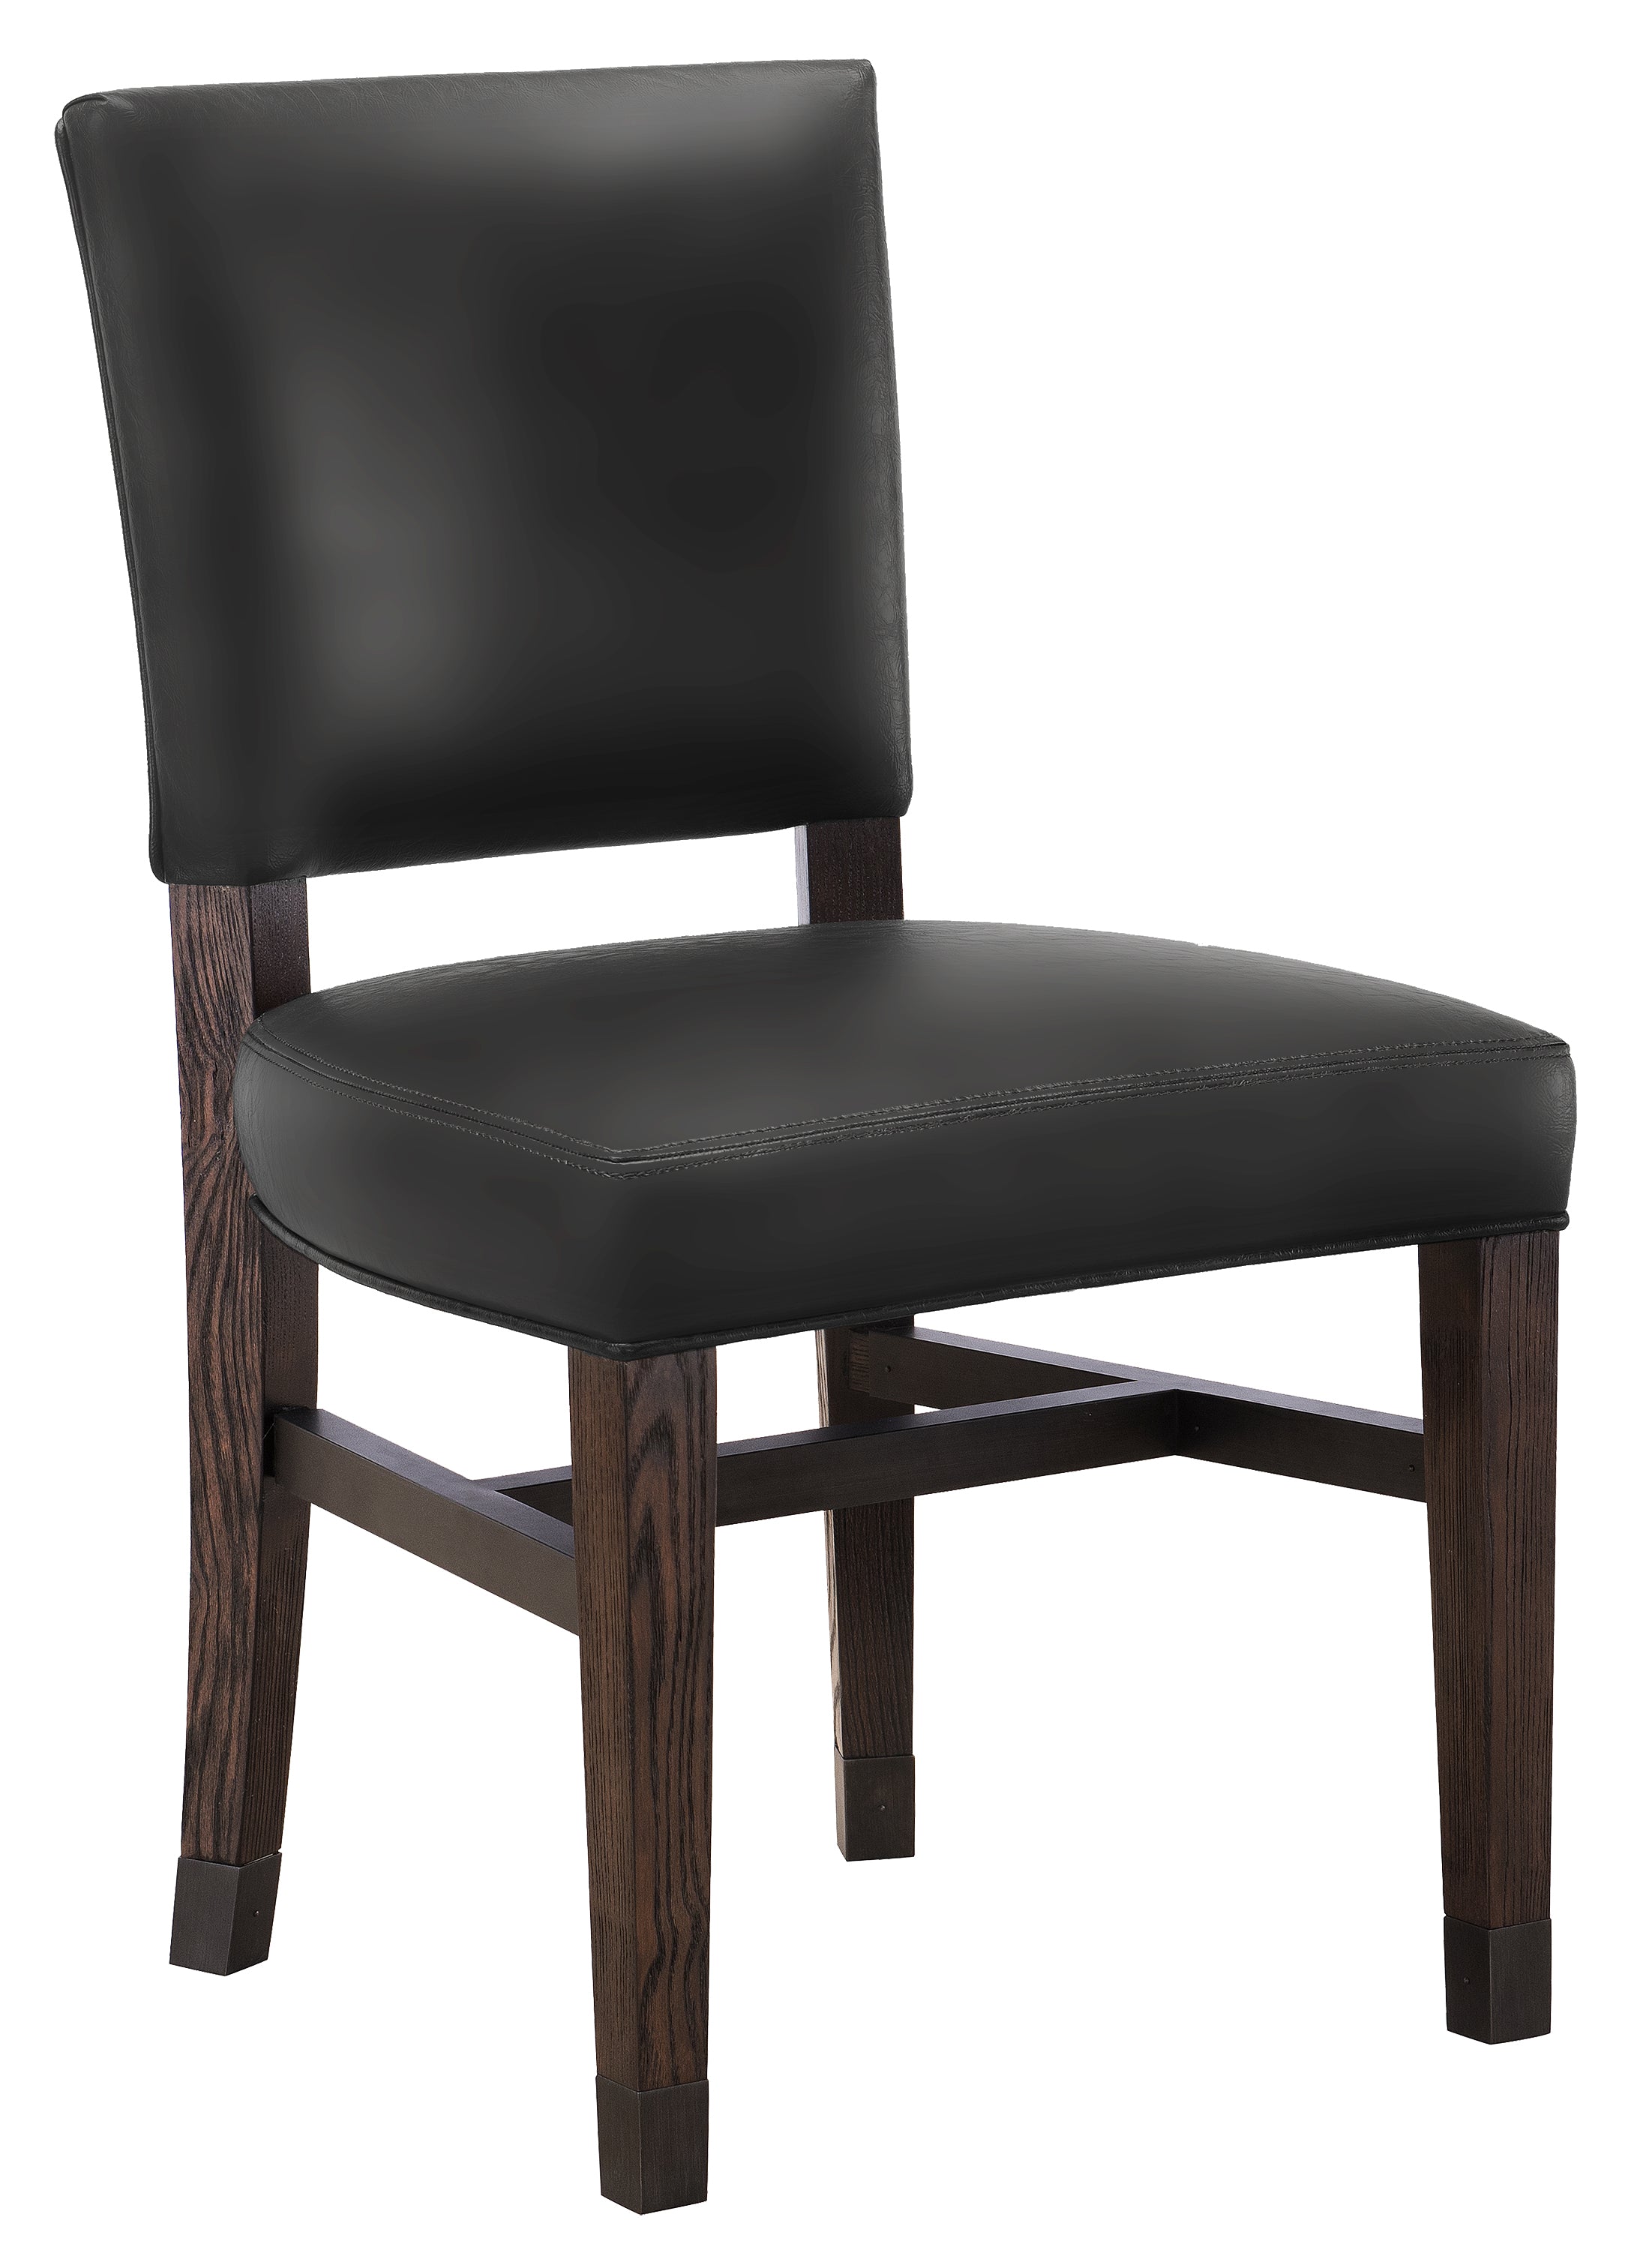 Legacy Billiards Harpeth Dining Chair in Whiskey Barrel Finish